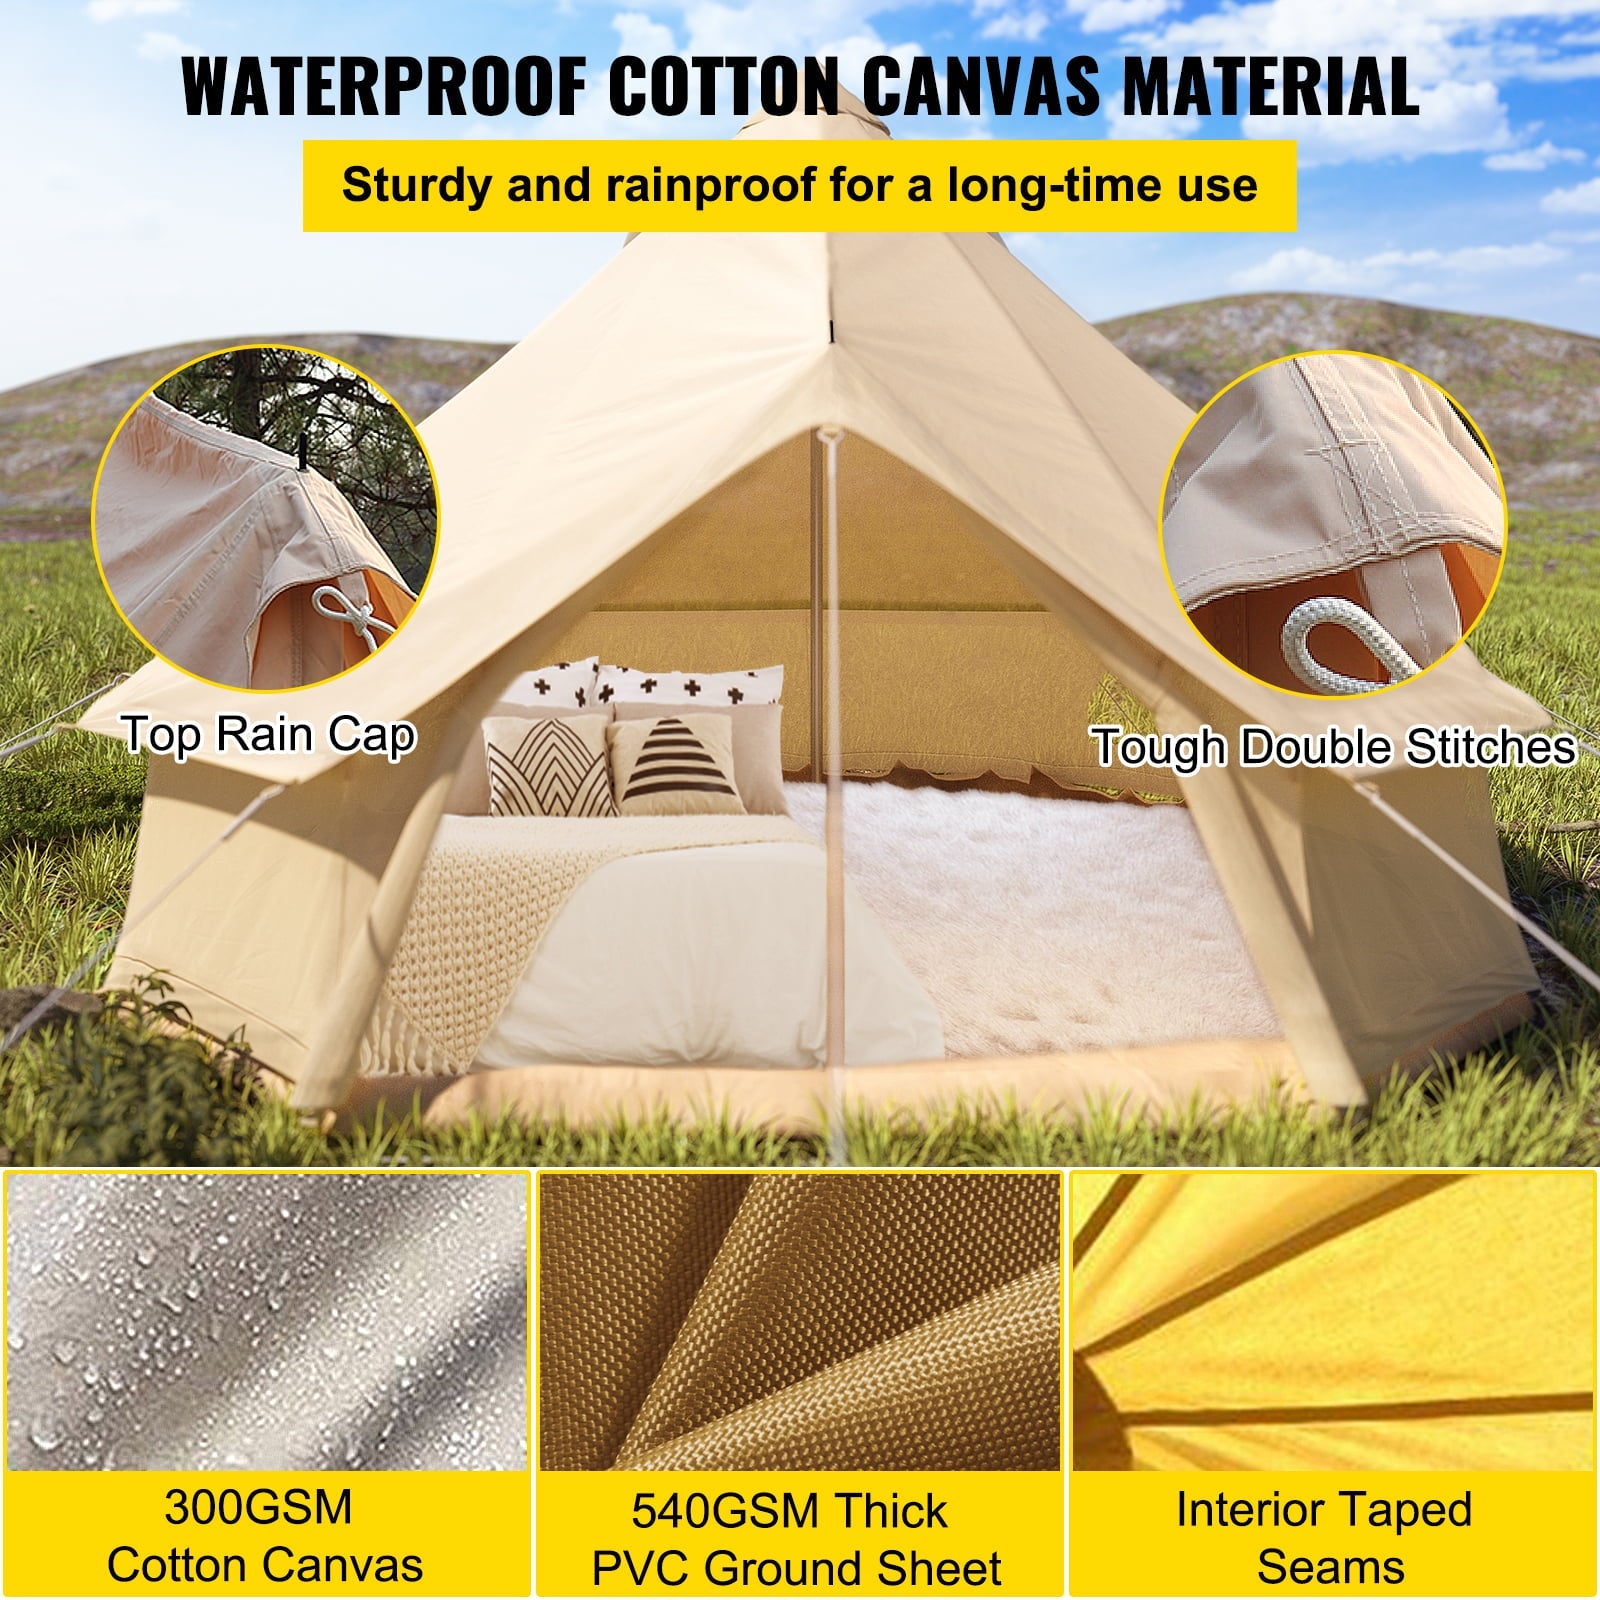 VEVORbrand Canvas Bell Tent 16.4ft Cotton Canvas Tent with Wall Stove Jacket Glamping Tent Waterproof Bell Tent for Family Camping Outdoor Hunting in 4 Seasons